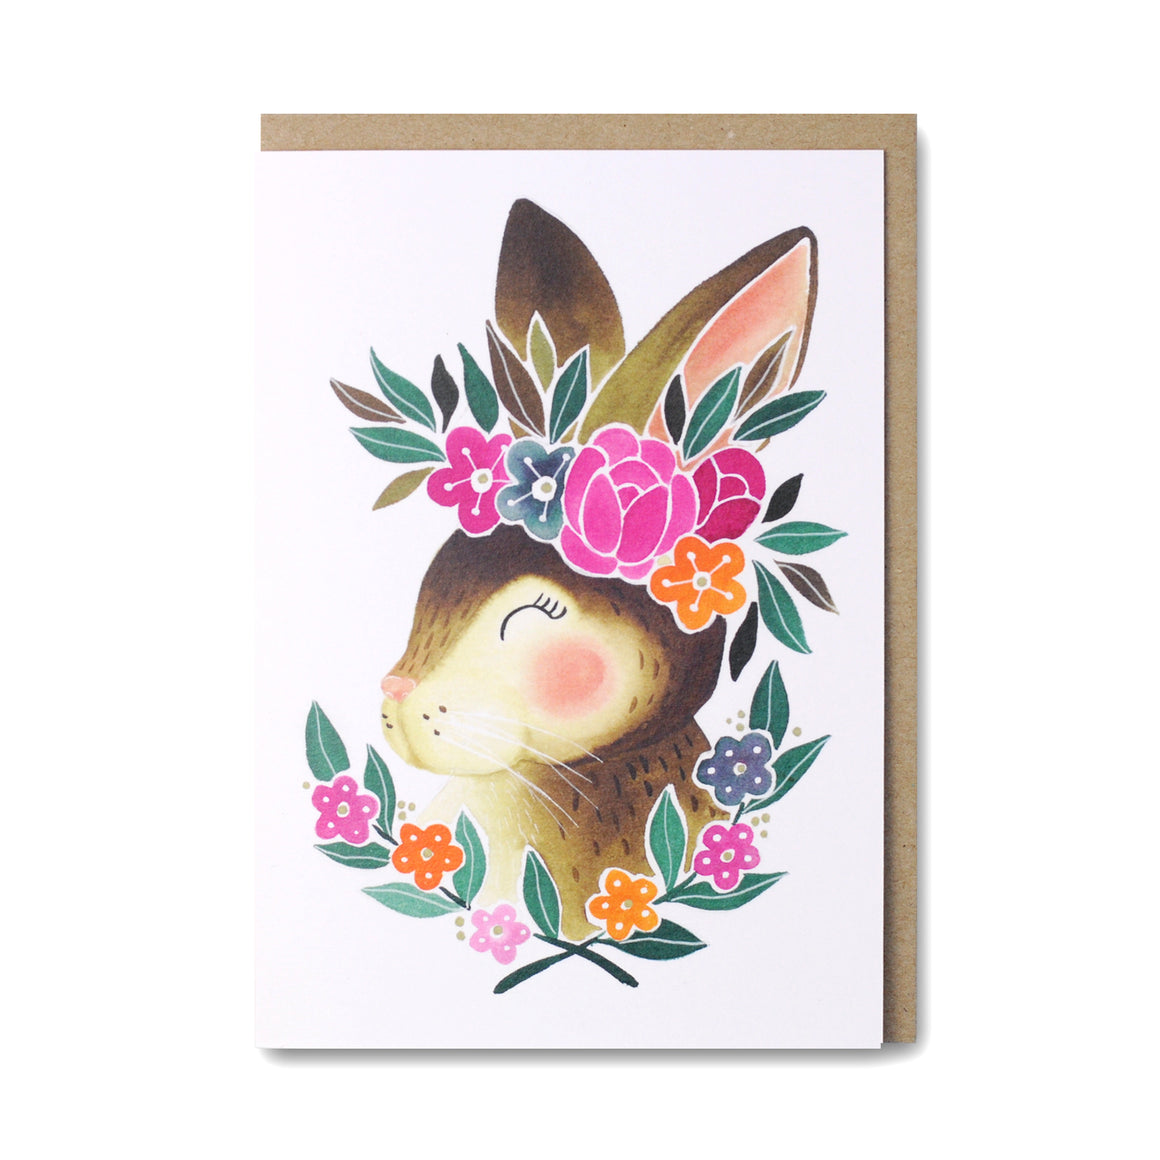 Bunny Greeting Card featuring rabbit wearing flower crown